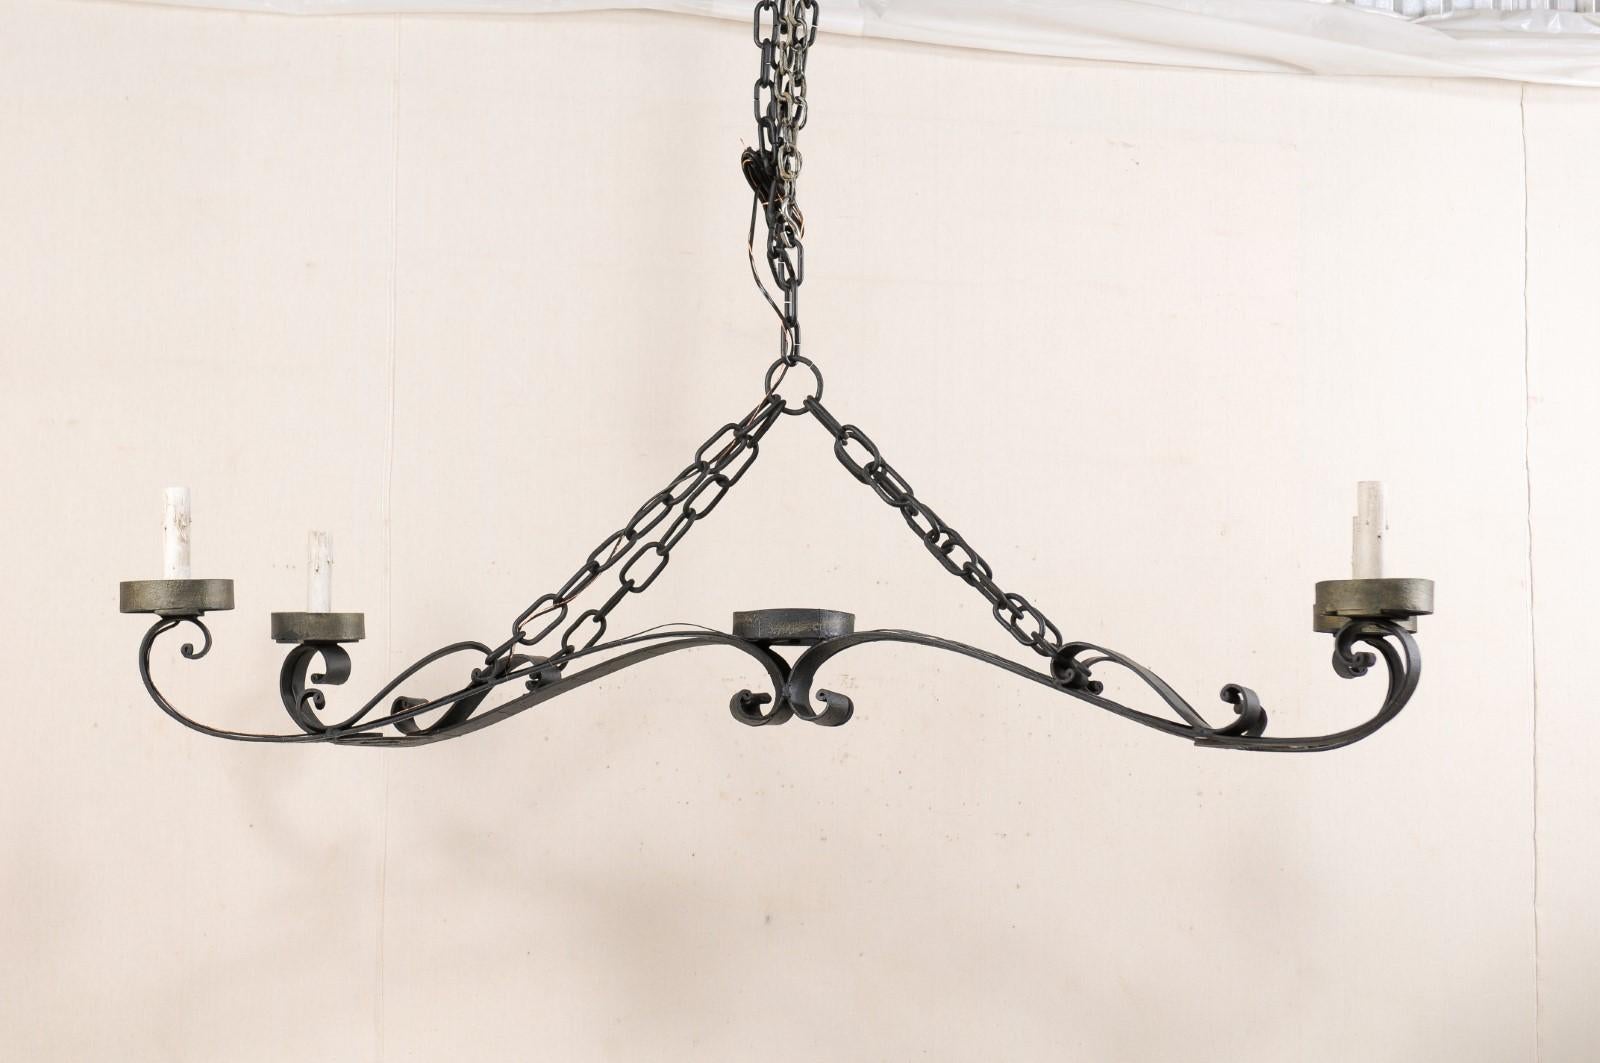 A large-sized French black iron chandelier from the mid-20th century. This vintage chandelier from France, with it's expansive spread of over 5 feet in width, has a light and airy feel with four elongated s-shaped arms which connect in the center,